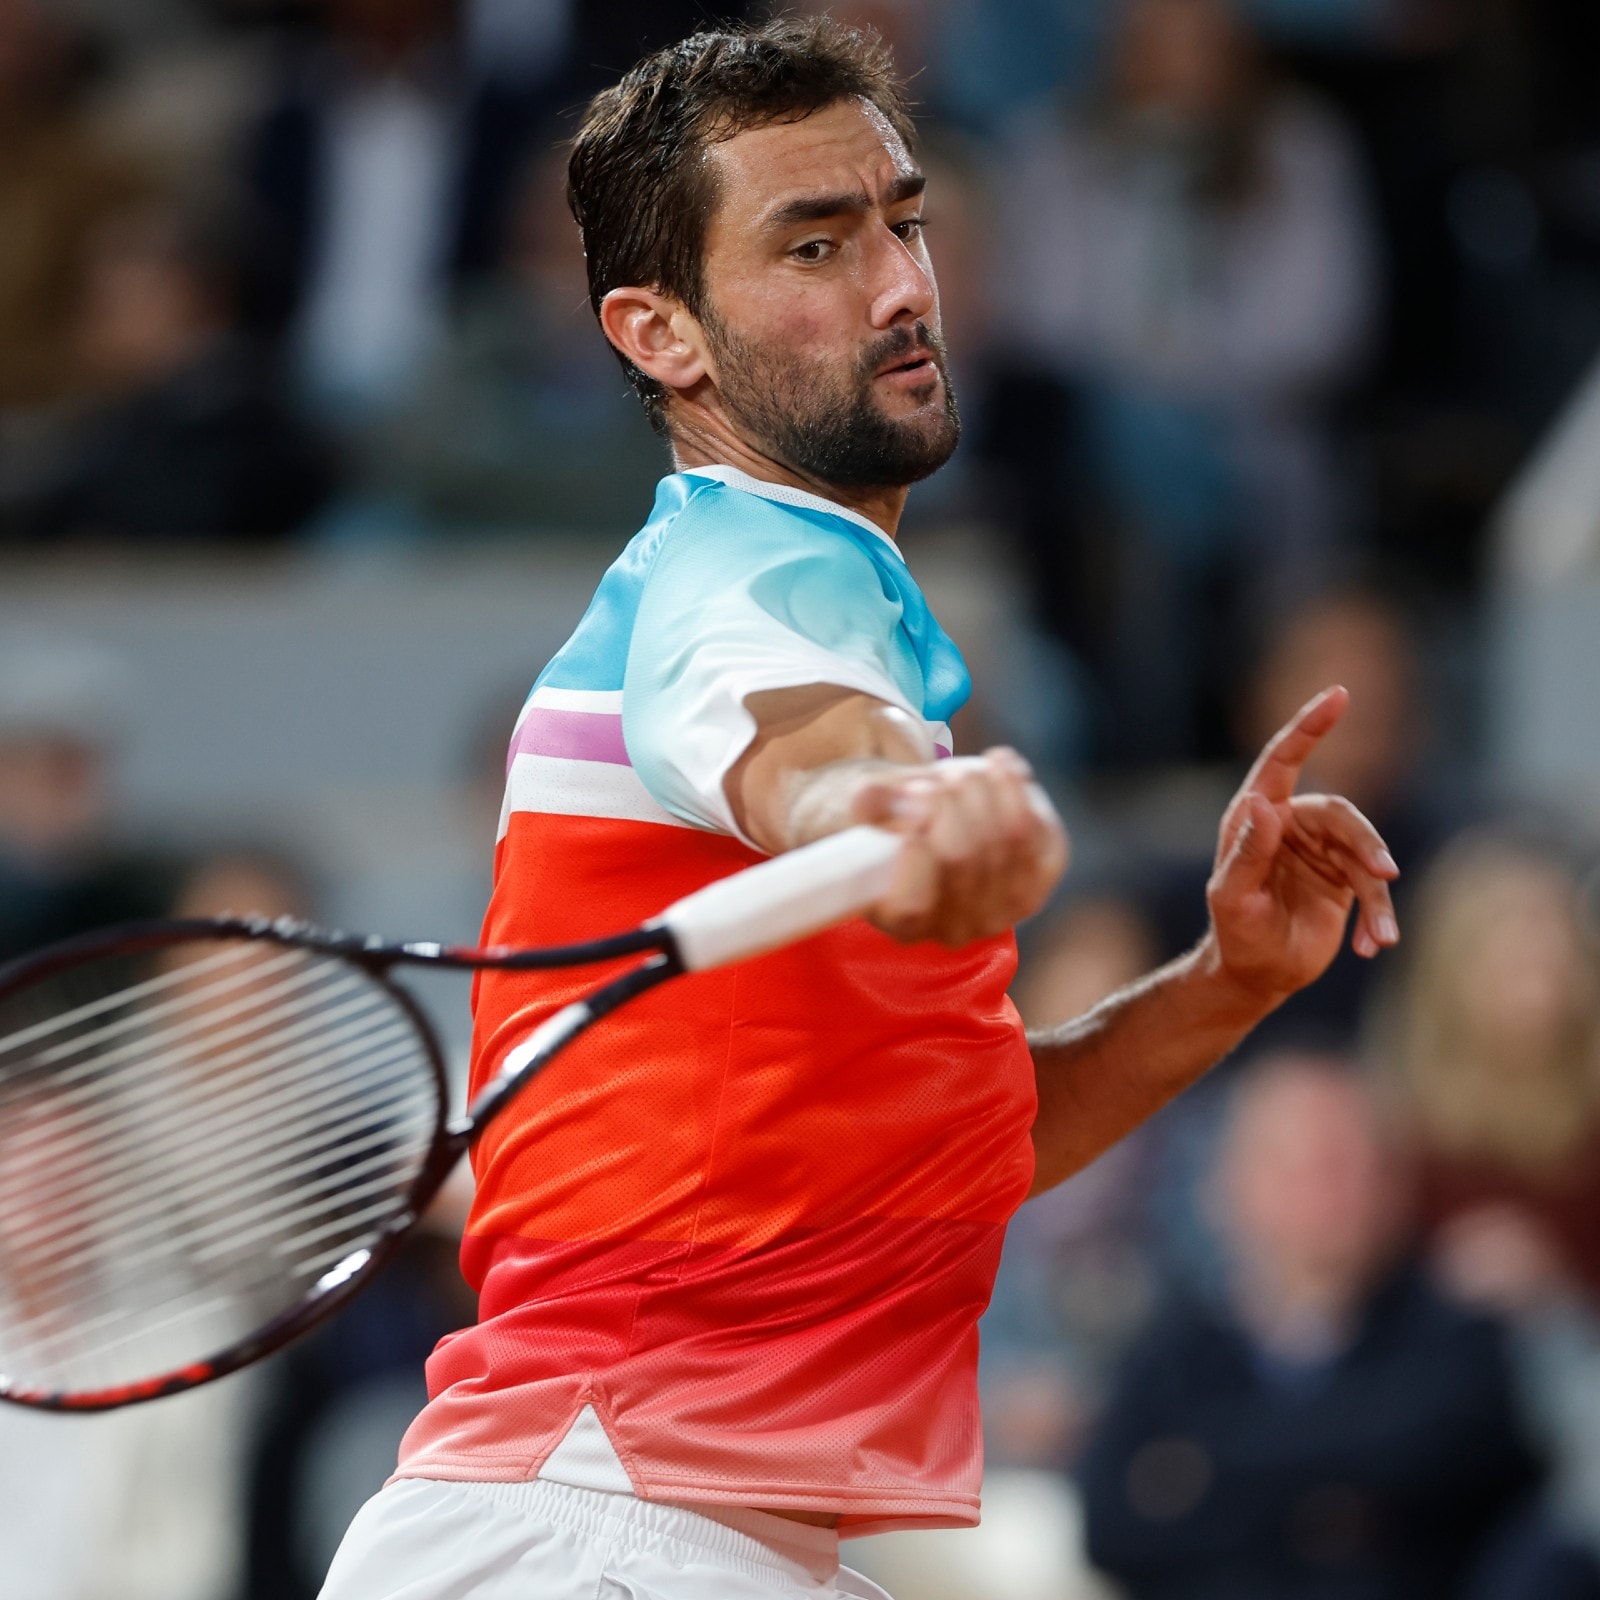 French Open 2022 Marin Cilic Downs Russian Second Seed Daniil Medvedev to Set Up Rublev Clash